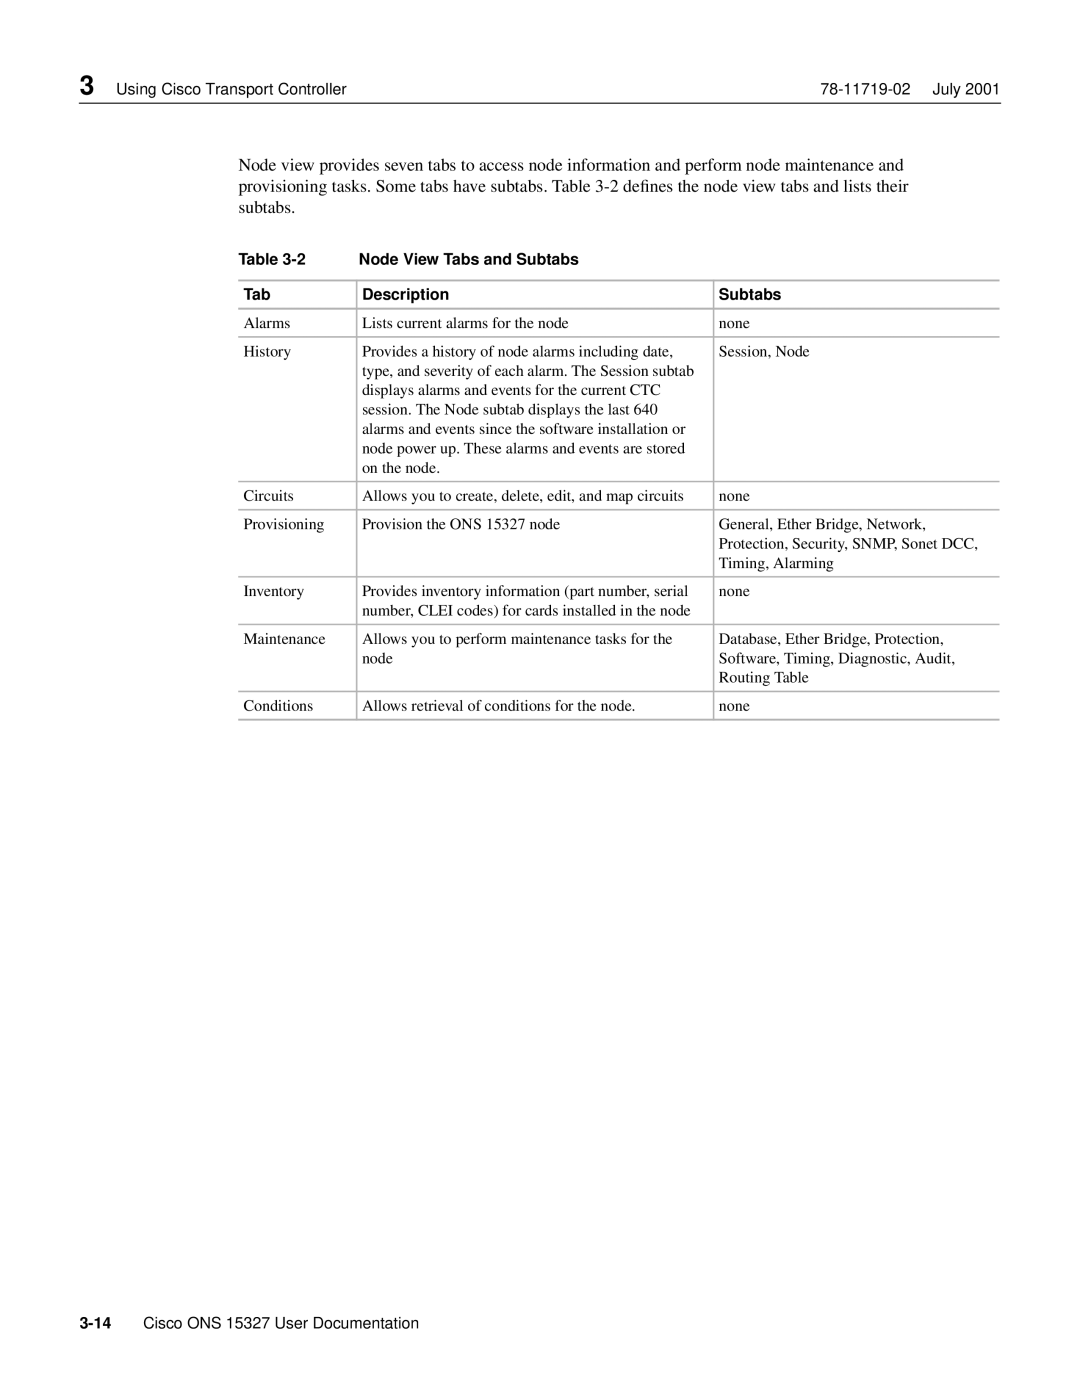 Cisco Systems ONS 15327 manual Node View Tabs and Subtabs, Description 